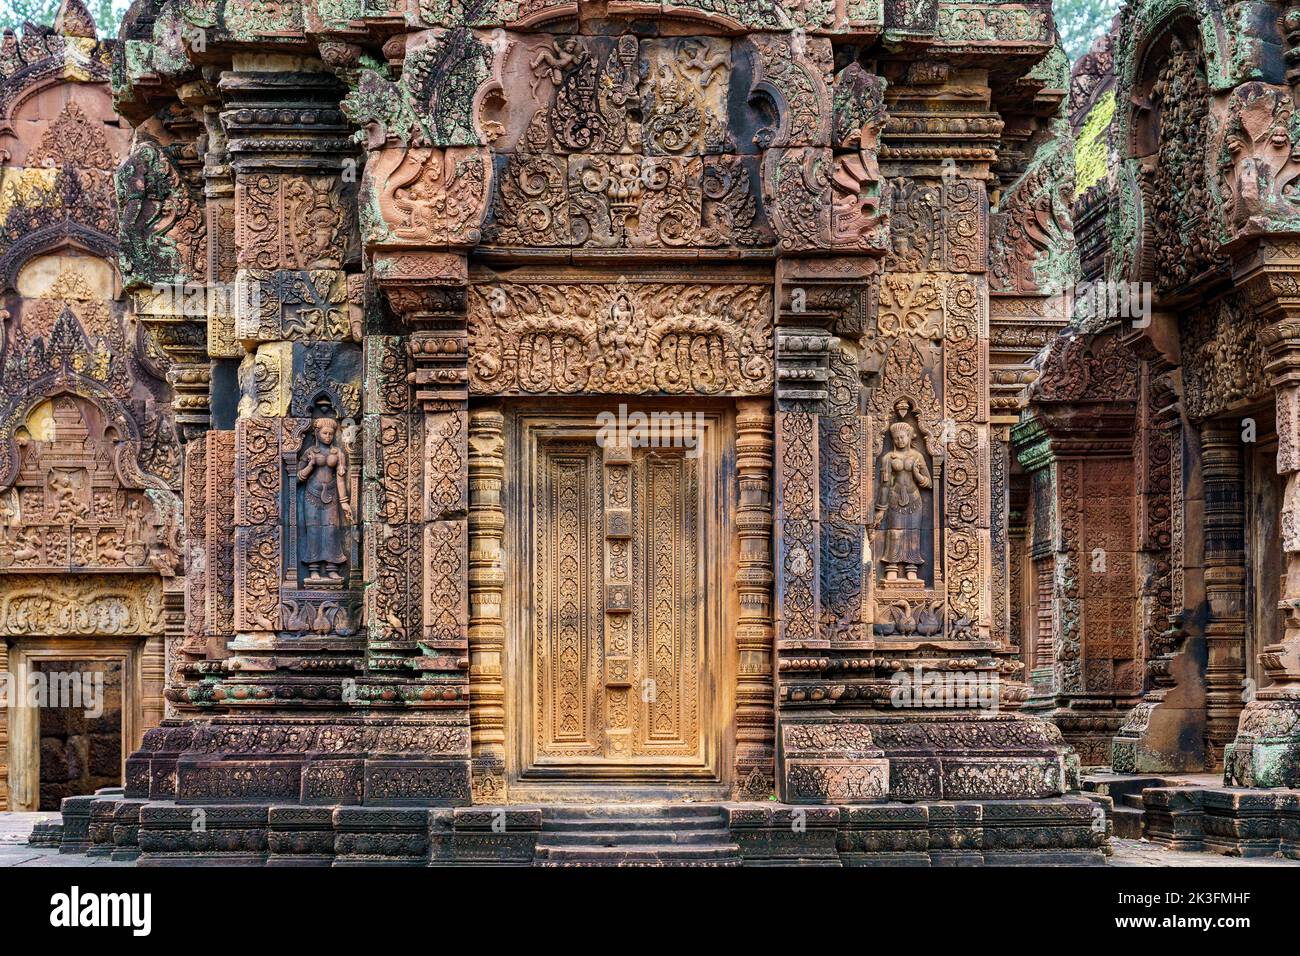 Cambodia. Siem Reap. The archaeological park of Angkor. Banteay Srei temple 10th century Hindu temple dedicated to Shiva. Detail of architecture Stock Photo